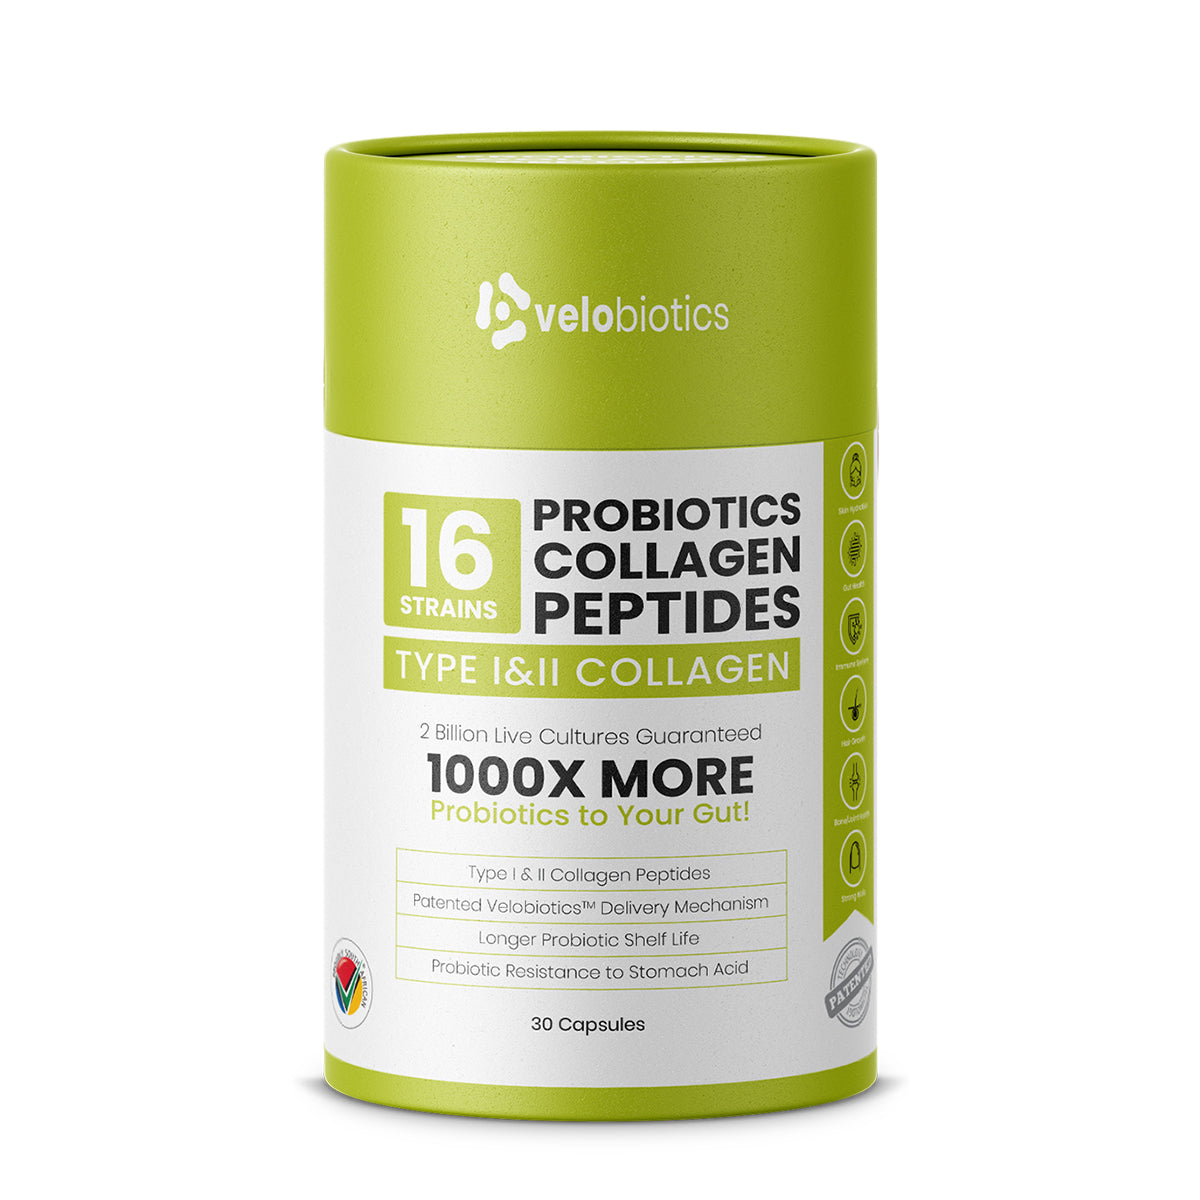 Probiotics Collagen Peptides Capsules for Skin, Hair, Nails & Joints